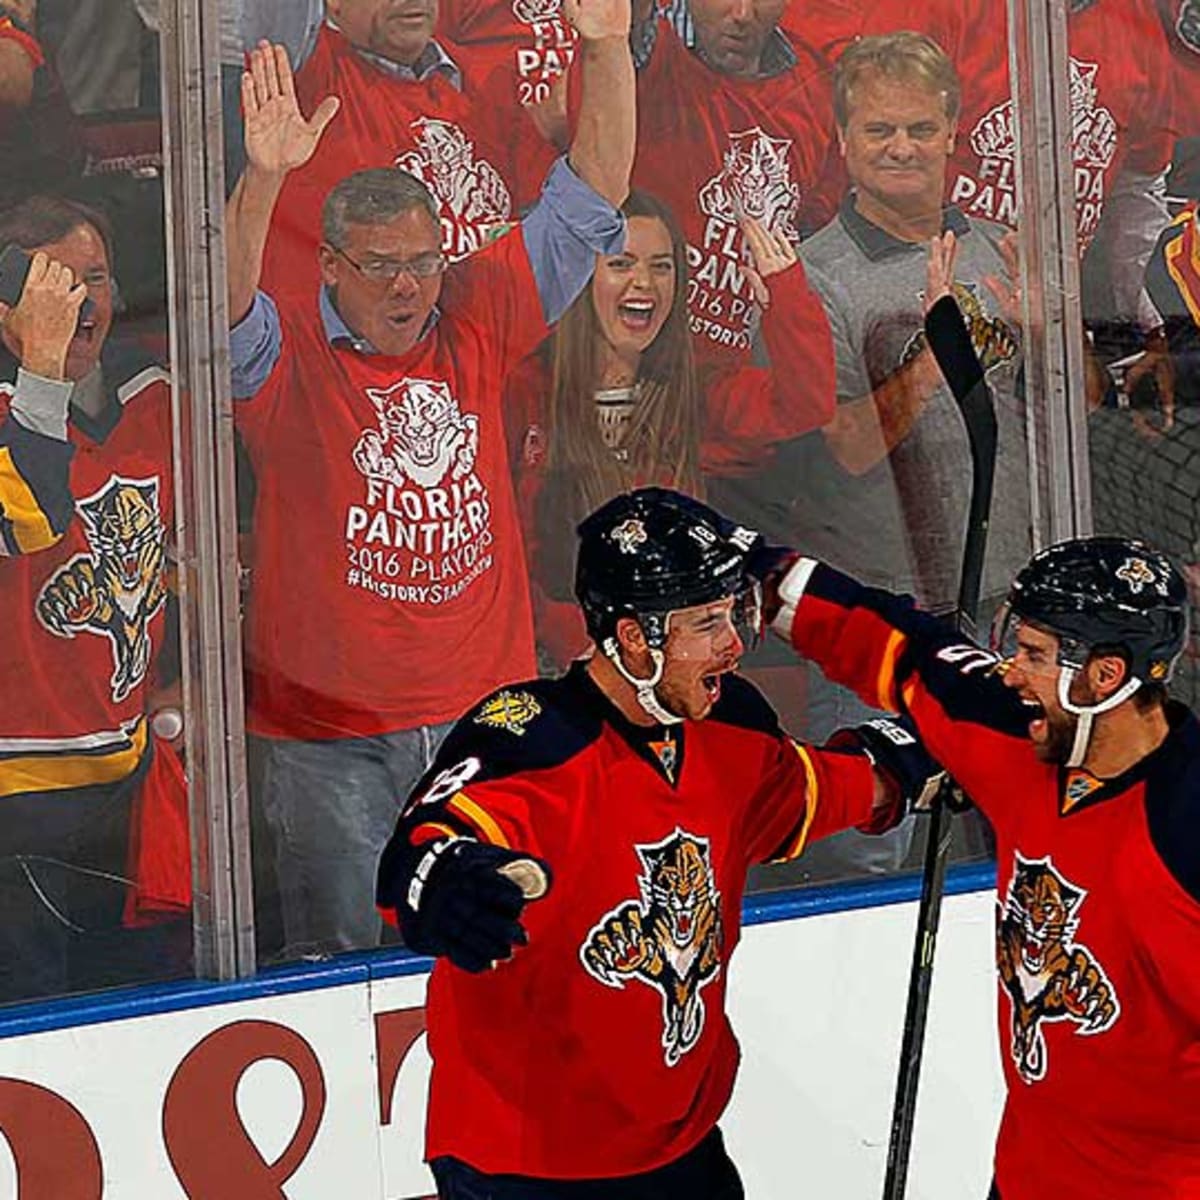 NHL Florida Panthers Jersey History RANKED! 